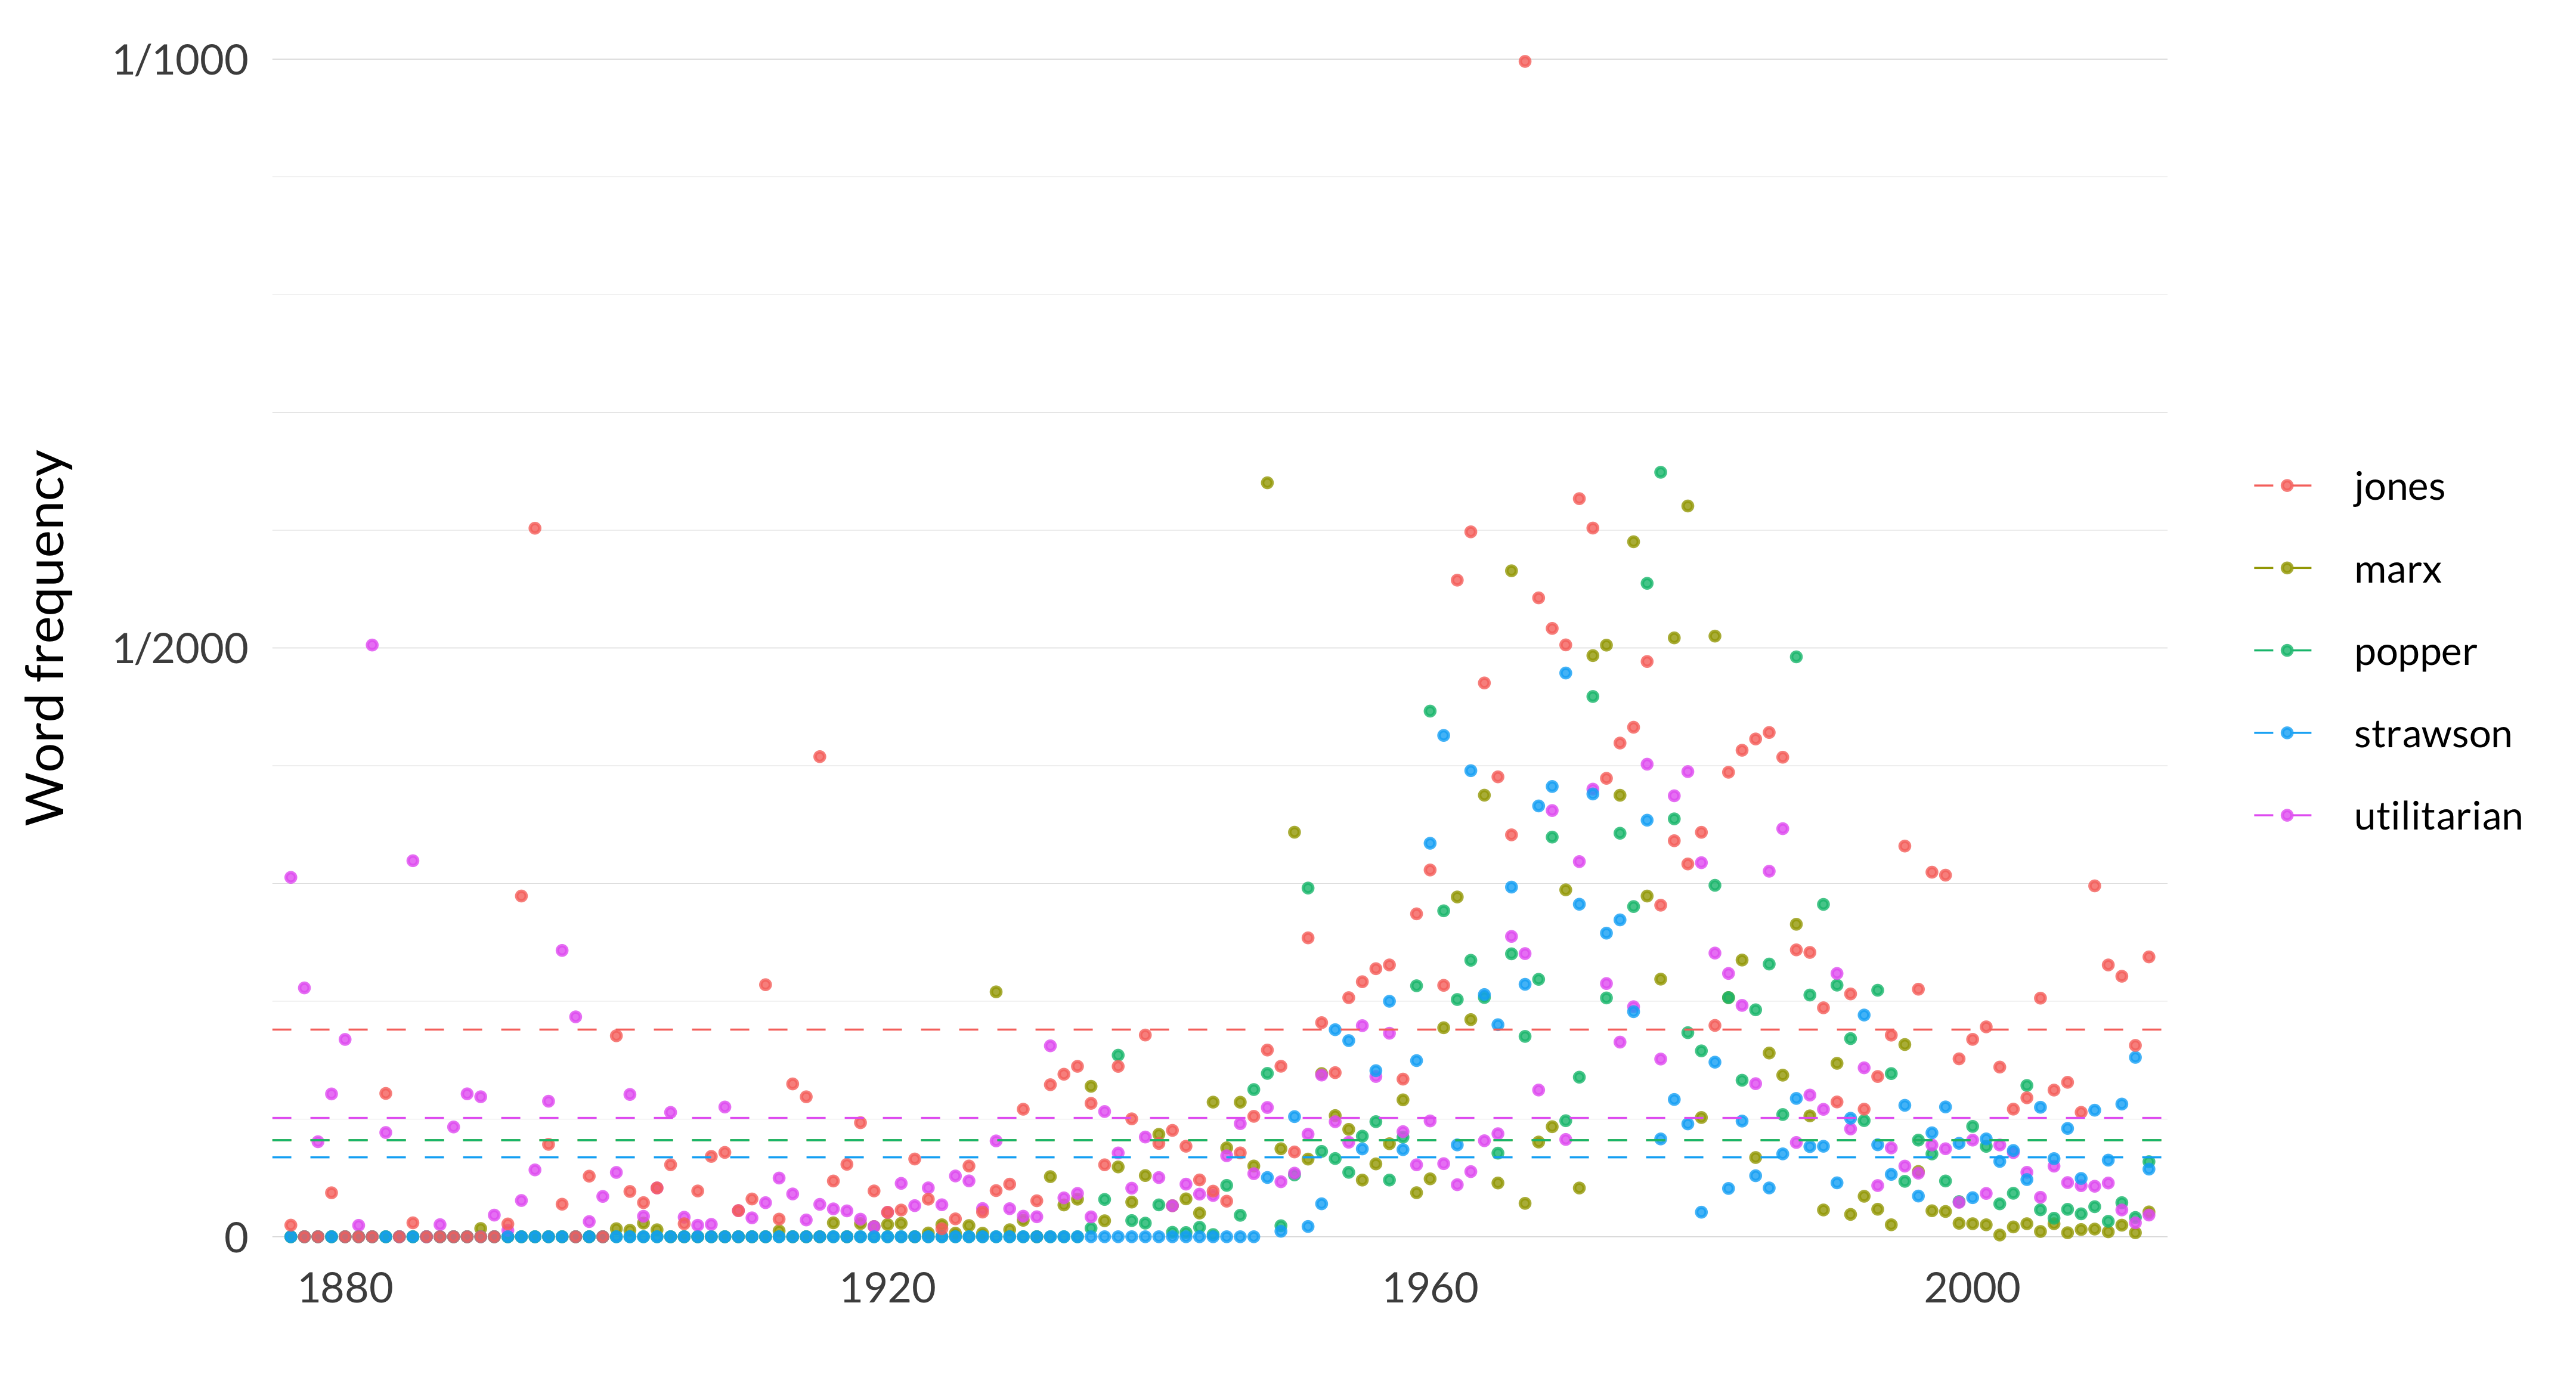 A scatterplot showing the frequency of the words marx, popper, utilitarian, strawson, jones. The word marx appears, on average across the years, 82 times per million words, and in the median year, it appears 13 times per million words. Its most frequent occurrence is in 1948 when it appears 640 times per million words, and its least frequent occurrence is in 1876 when it appears 0 times per million words. The word popper appears, on average across the years, 82 times per million words, and in the median year, it appears 16 times per million words. Its most frequent occurrence is in 1977 when it appears 649 times per million words, and its least frequent occurrence is in 1876 when it appears 0 times per million words. The word utilitarian appears, on average across the years, 101 times per million words, and in the median year, it appears 66 times per million words. Its most frequent occurrence is in 1882 when it appears 502 times per million words, and its least frequent occurrence is in 1884 when it appears 0 times per million words. The word strawson appears, on average across the years, 67 times per million words, and in the median year, it appears 0 times per million words. Its most frequent occurrence is in 1970 when it appears 479 times per million words, and its least frequent occurrence is in 1876 when it appears 0 times per million words. The word jones appears, on average across the years, 176 times per million words, and in the median year, it appears 130 times per million words. Its most frequent occurrence is in 1967 when it appears 998 times per million words, and its least frequent occurrence is in 1877 when it appears 0 times per million words. 